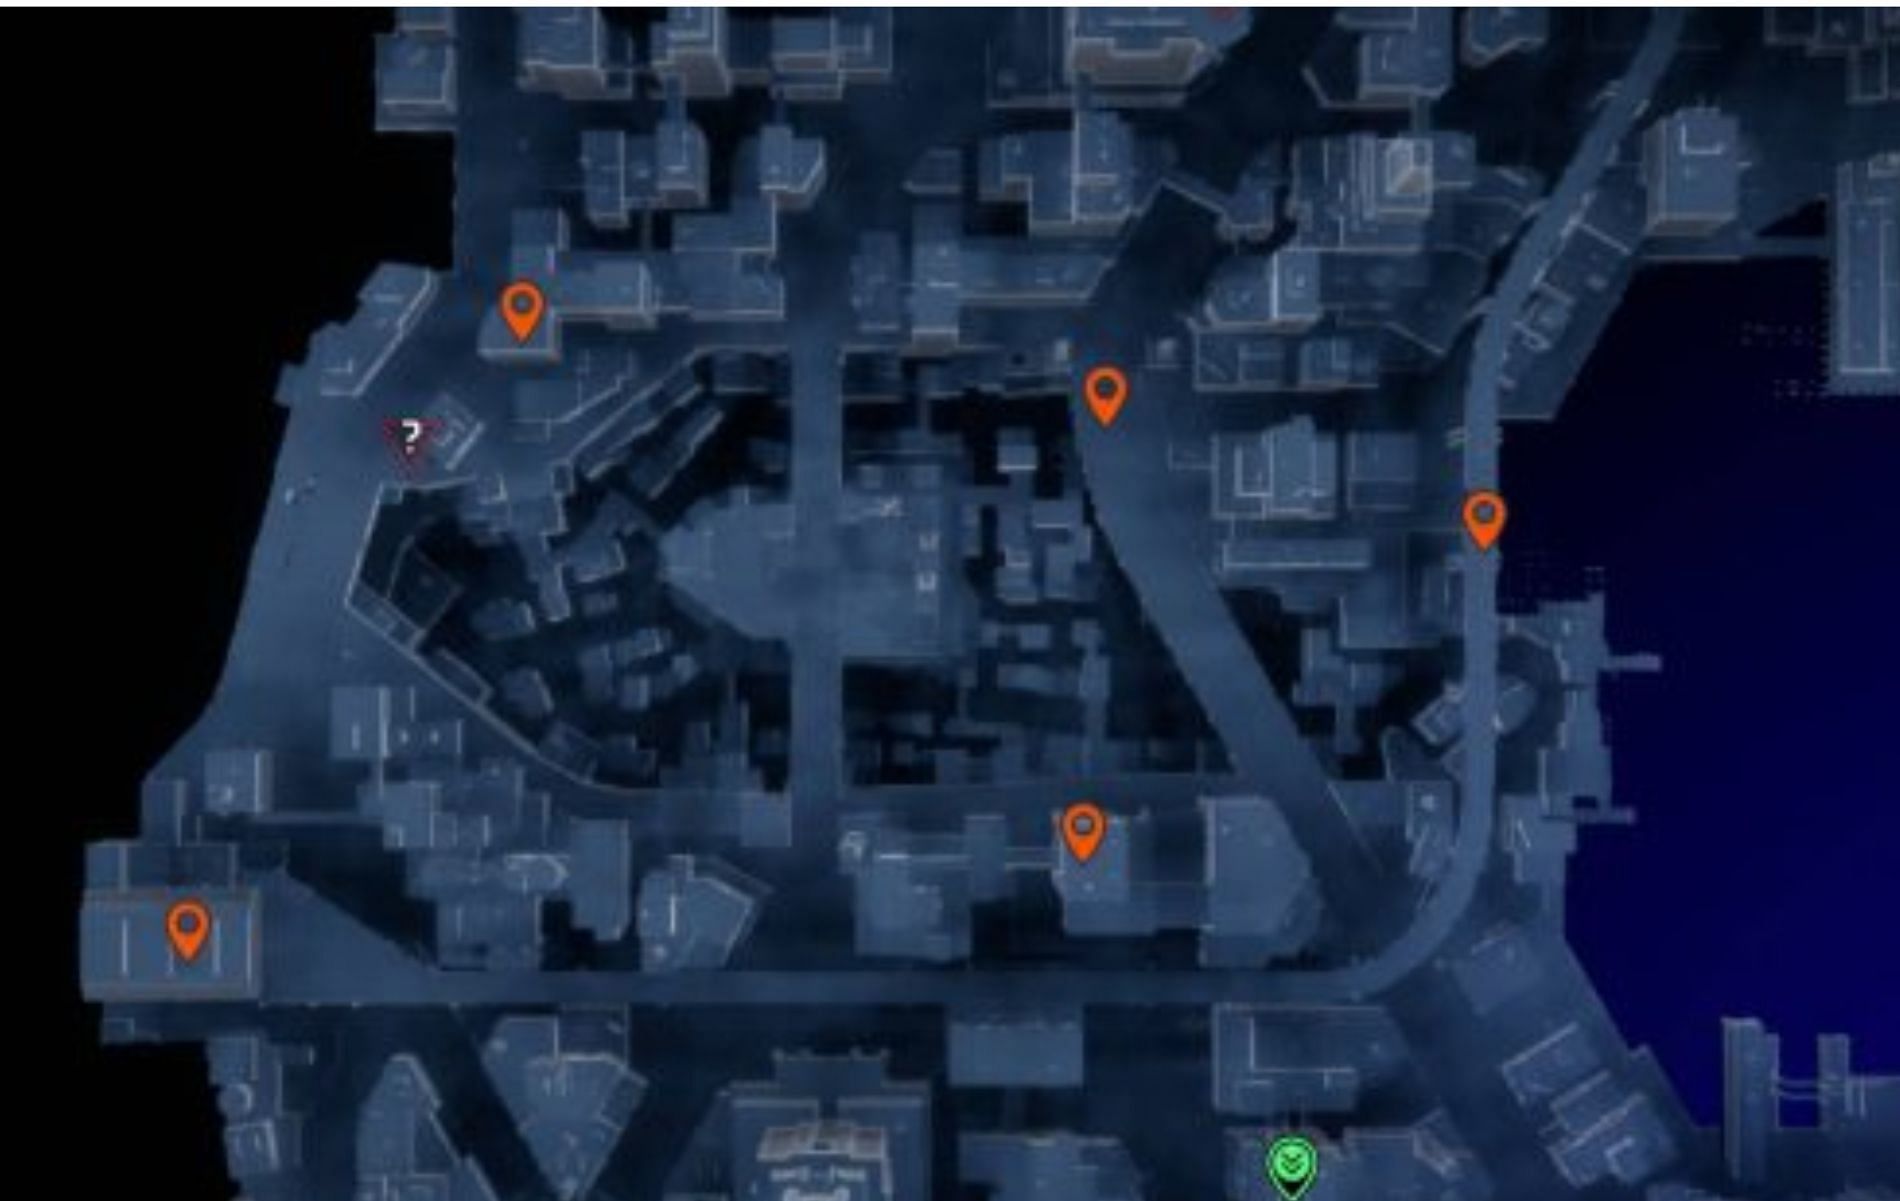 Map to find Batarangs in The Cauldron (image via WB Games)